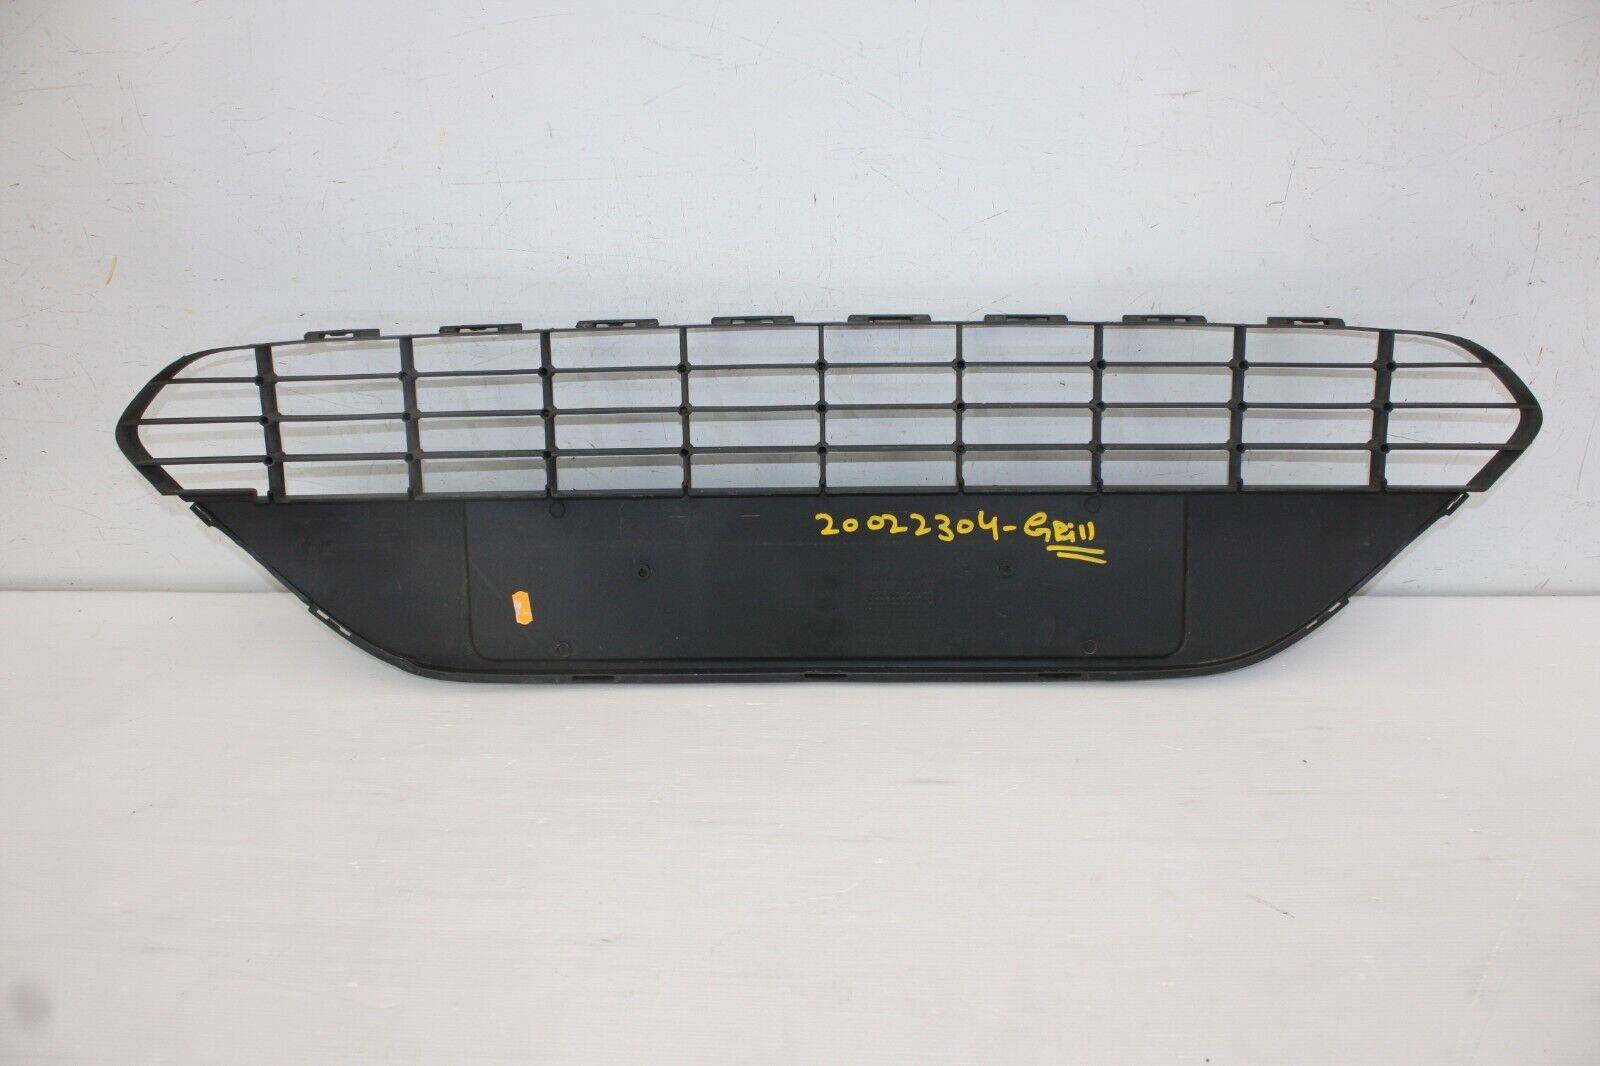 Ford-Focus-Front-Bumper-Grill-2008-TO-2011-8M51-17B968-BE-Genuine-SEE-PICS-175622452576-13